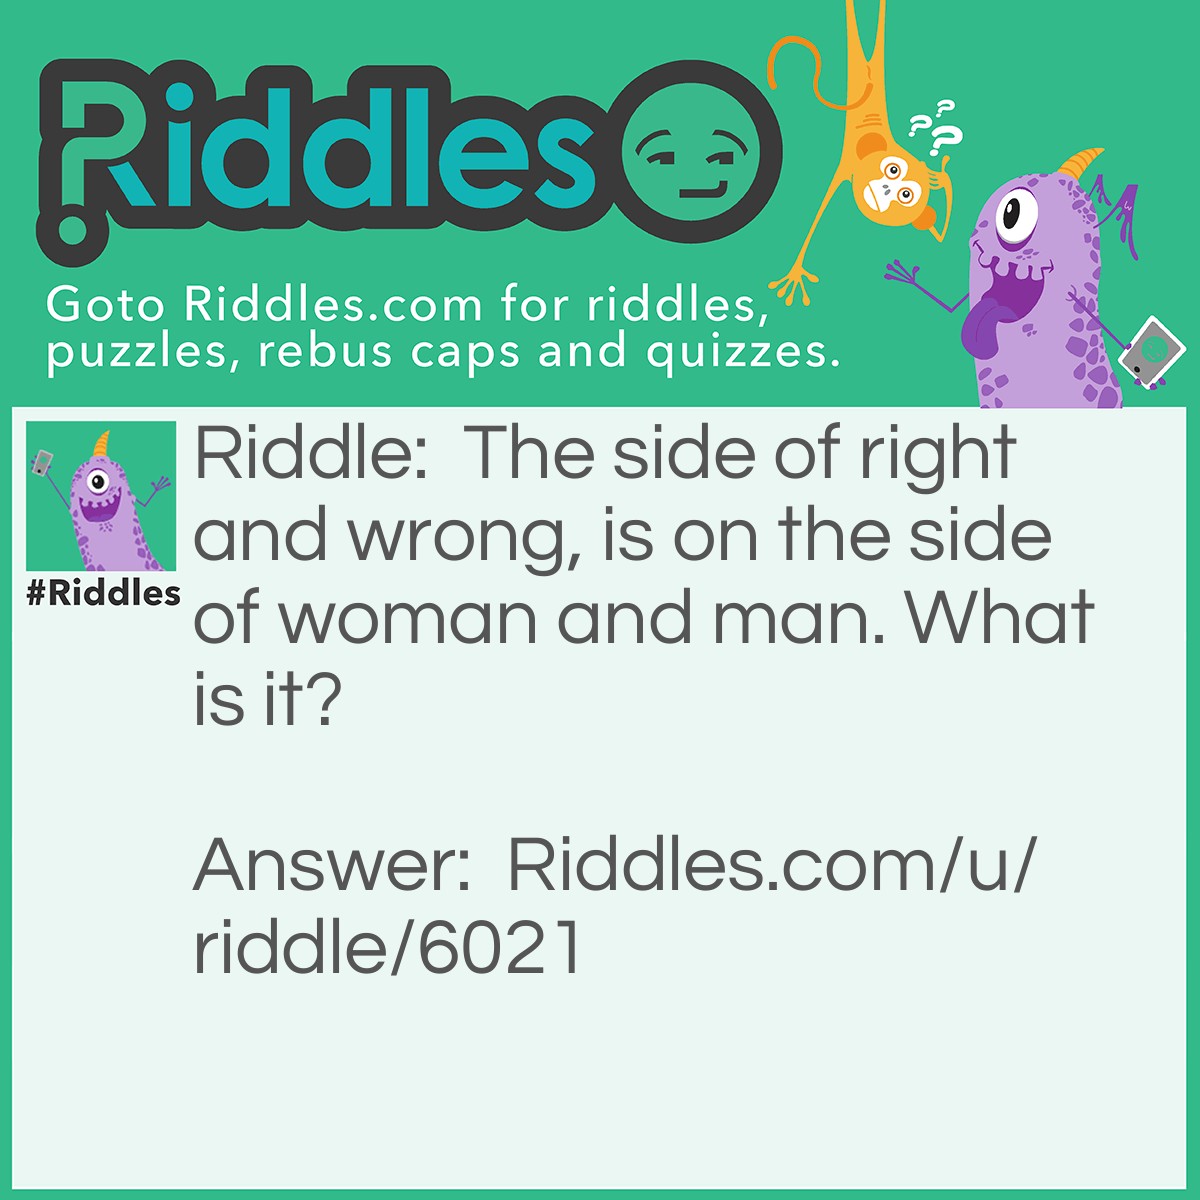 Riddle: The side of right and wrong, is on the side of woman and man. What is it? Answer: Love Handles.